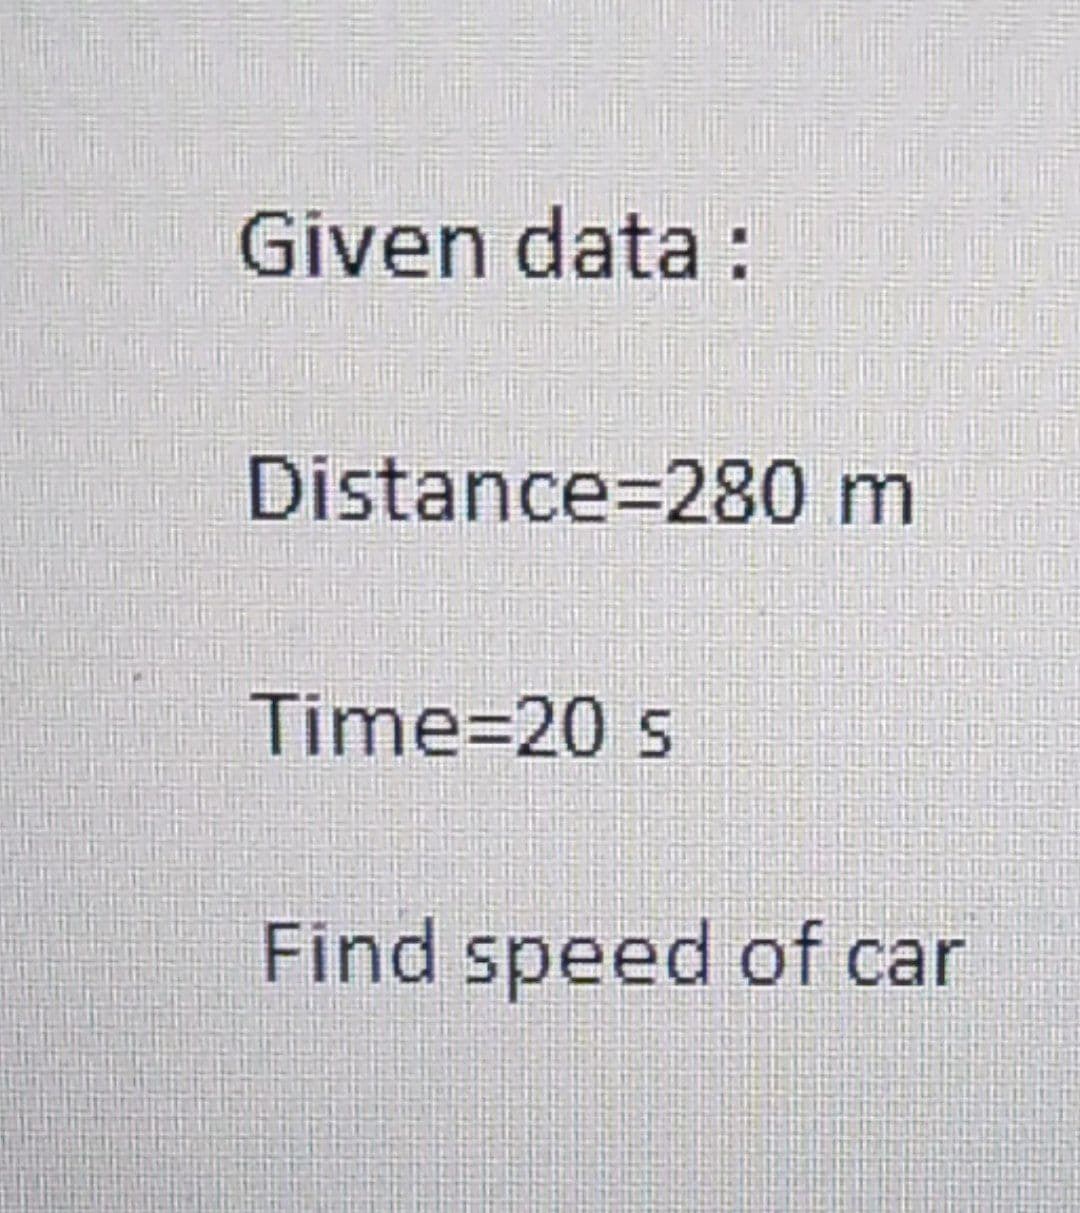 Given data:
Distance 280 m
Time=20 s
Find speed of car